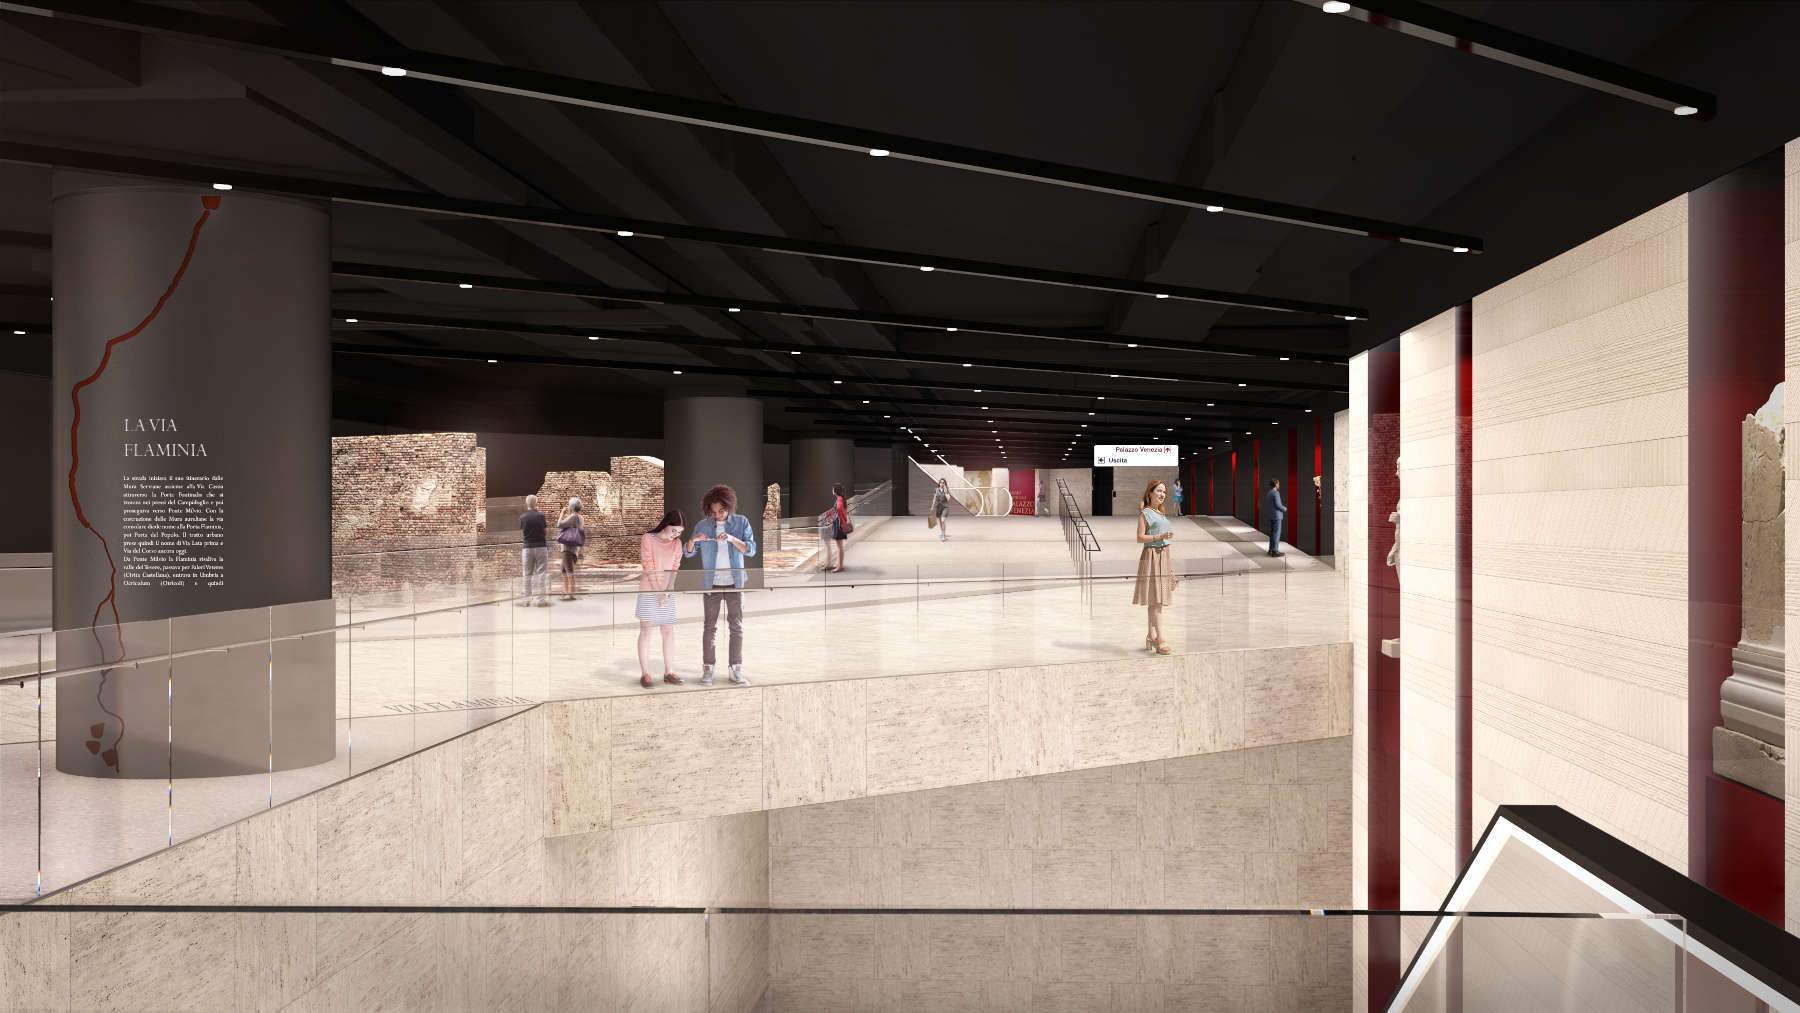 A subway station that will also be a museum: this is the Piazza Venezia station in Rome